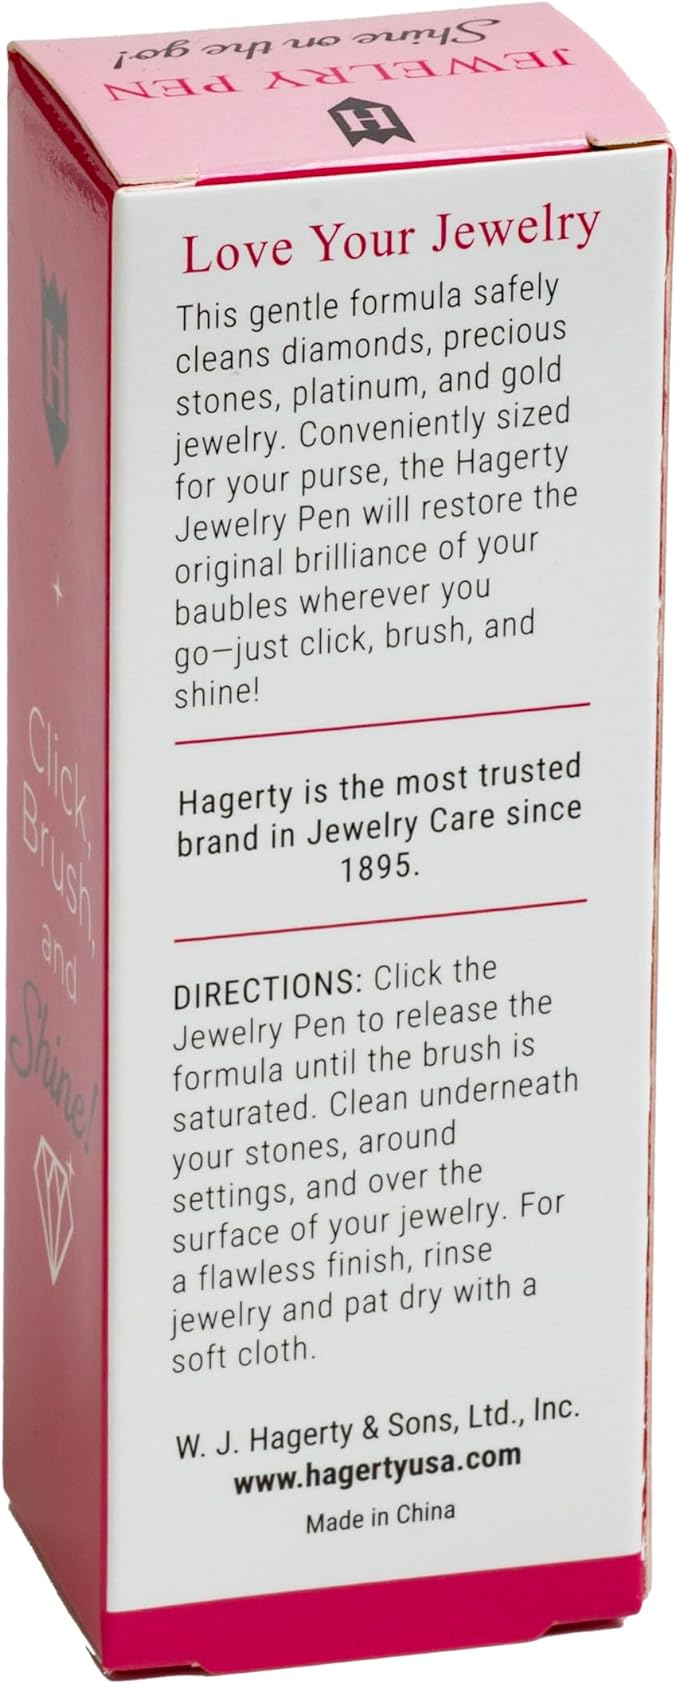 Hagerty Jewelry Pen for On-The-Go Jewelry Cleaning